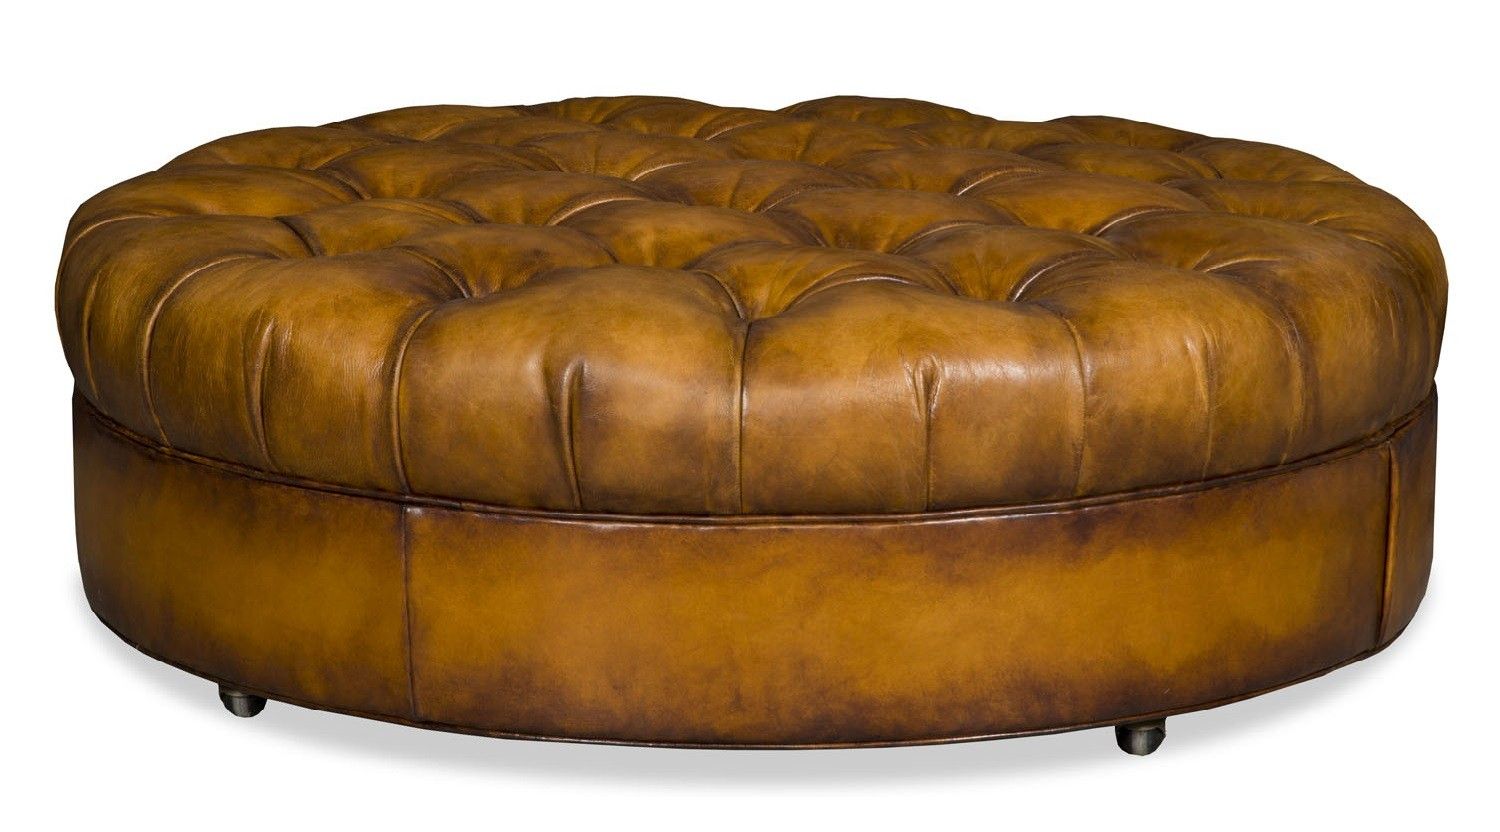 Round Leather Tufted Ottoman Intended For Gold And White Leather Round Ottomans (View 2 of 20)